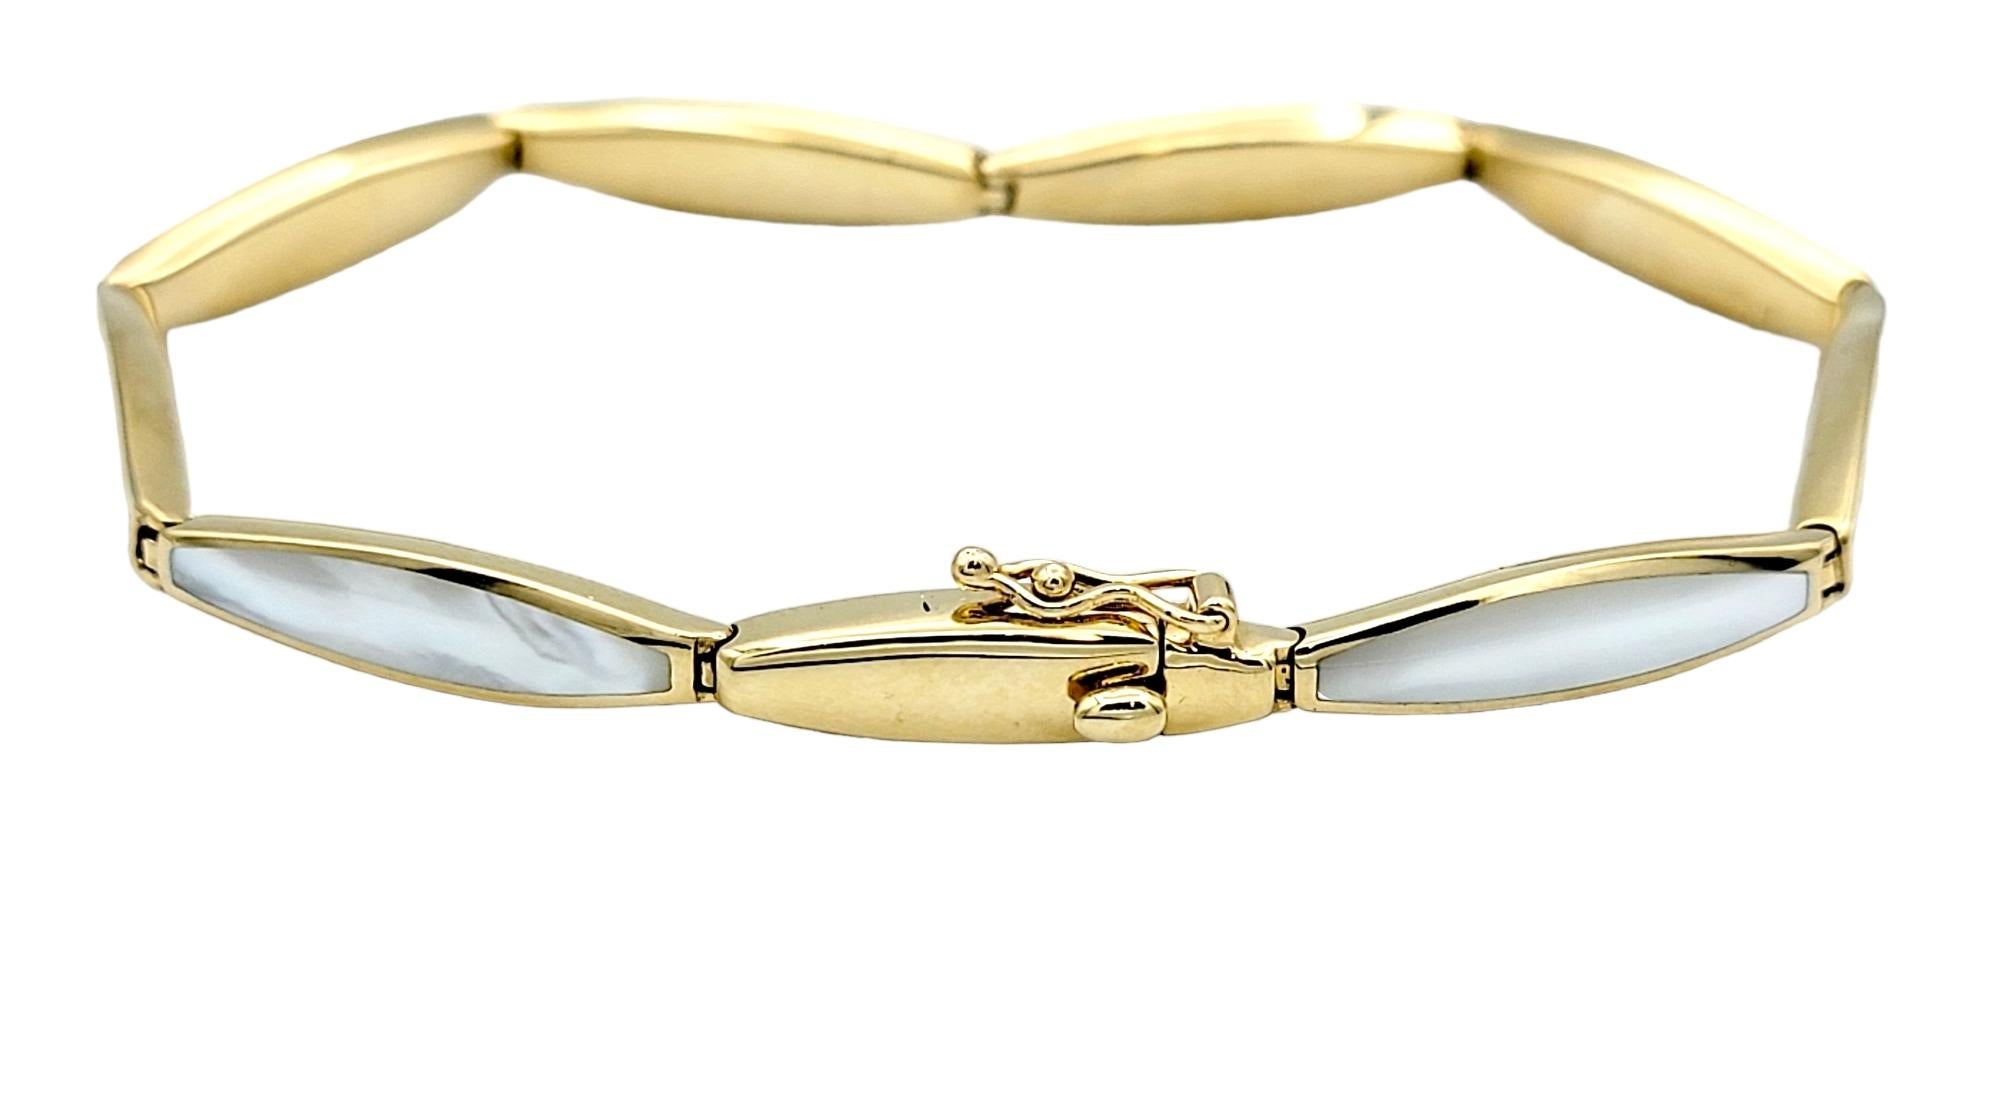 Kabana Inlaid Mother of Pearl Elongated Link Bracelet in 14 Karat Yellow Gold In Good Condition For Sale In Scottsdale, AZ